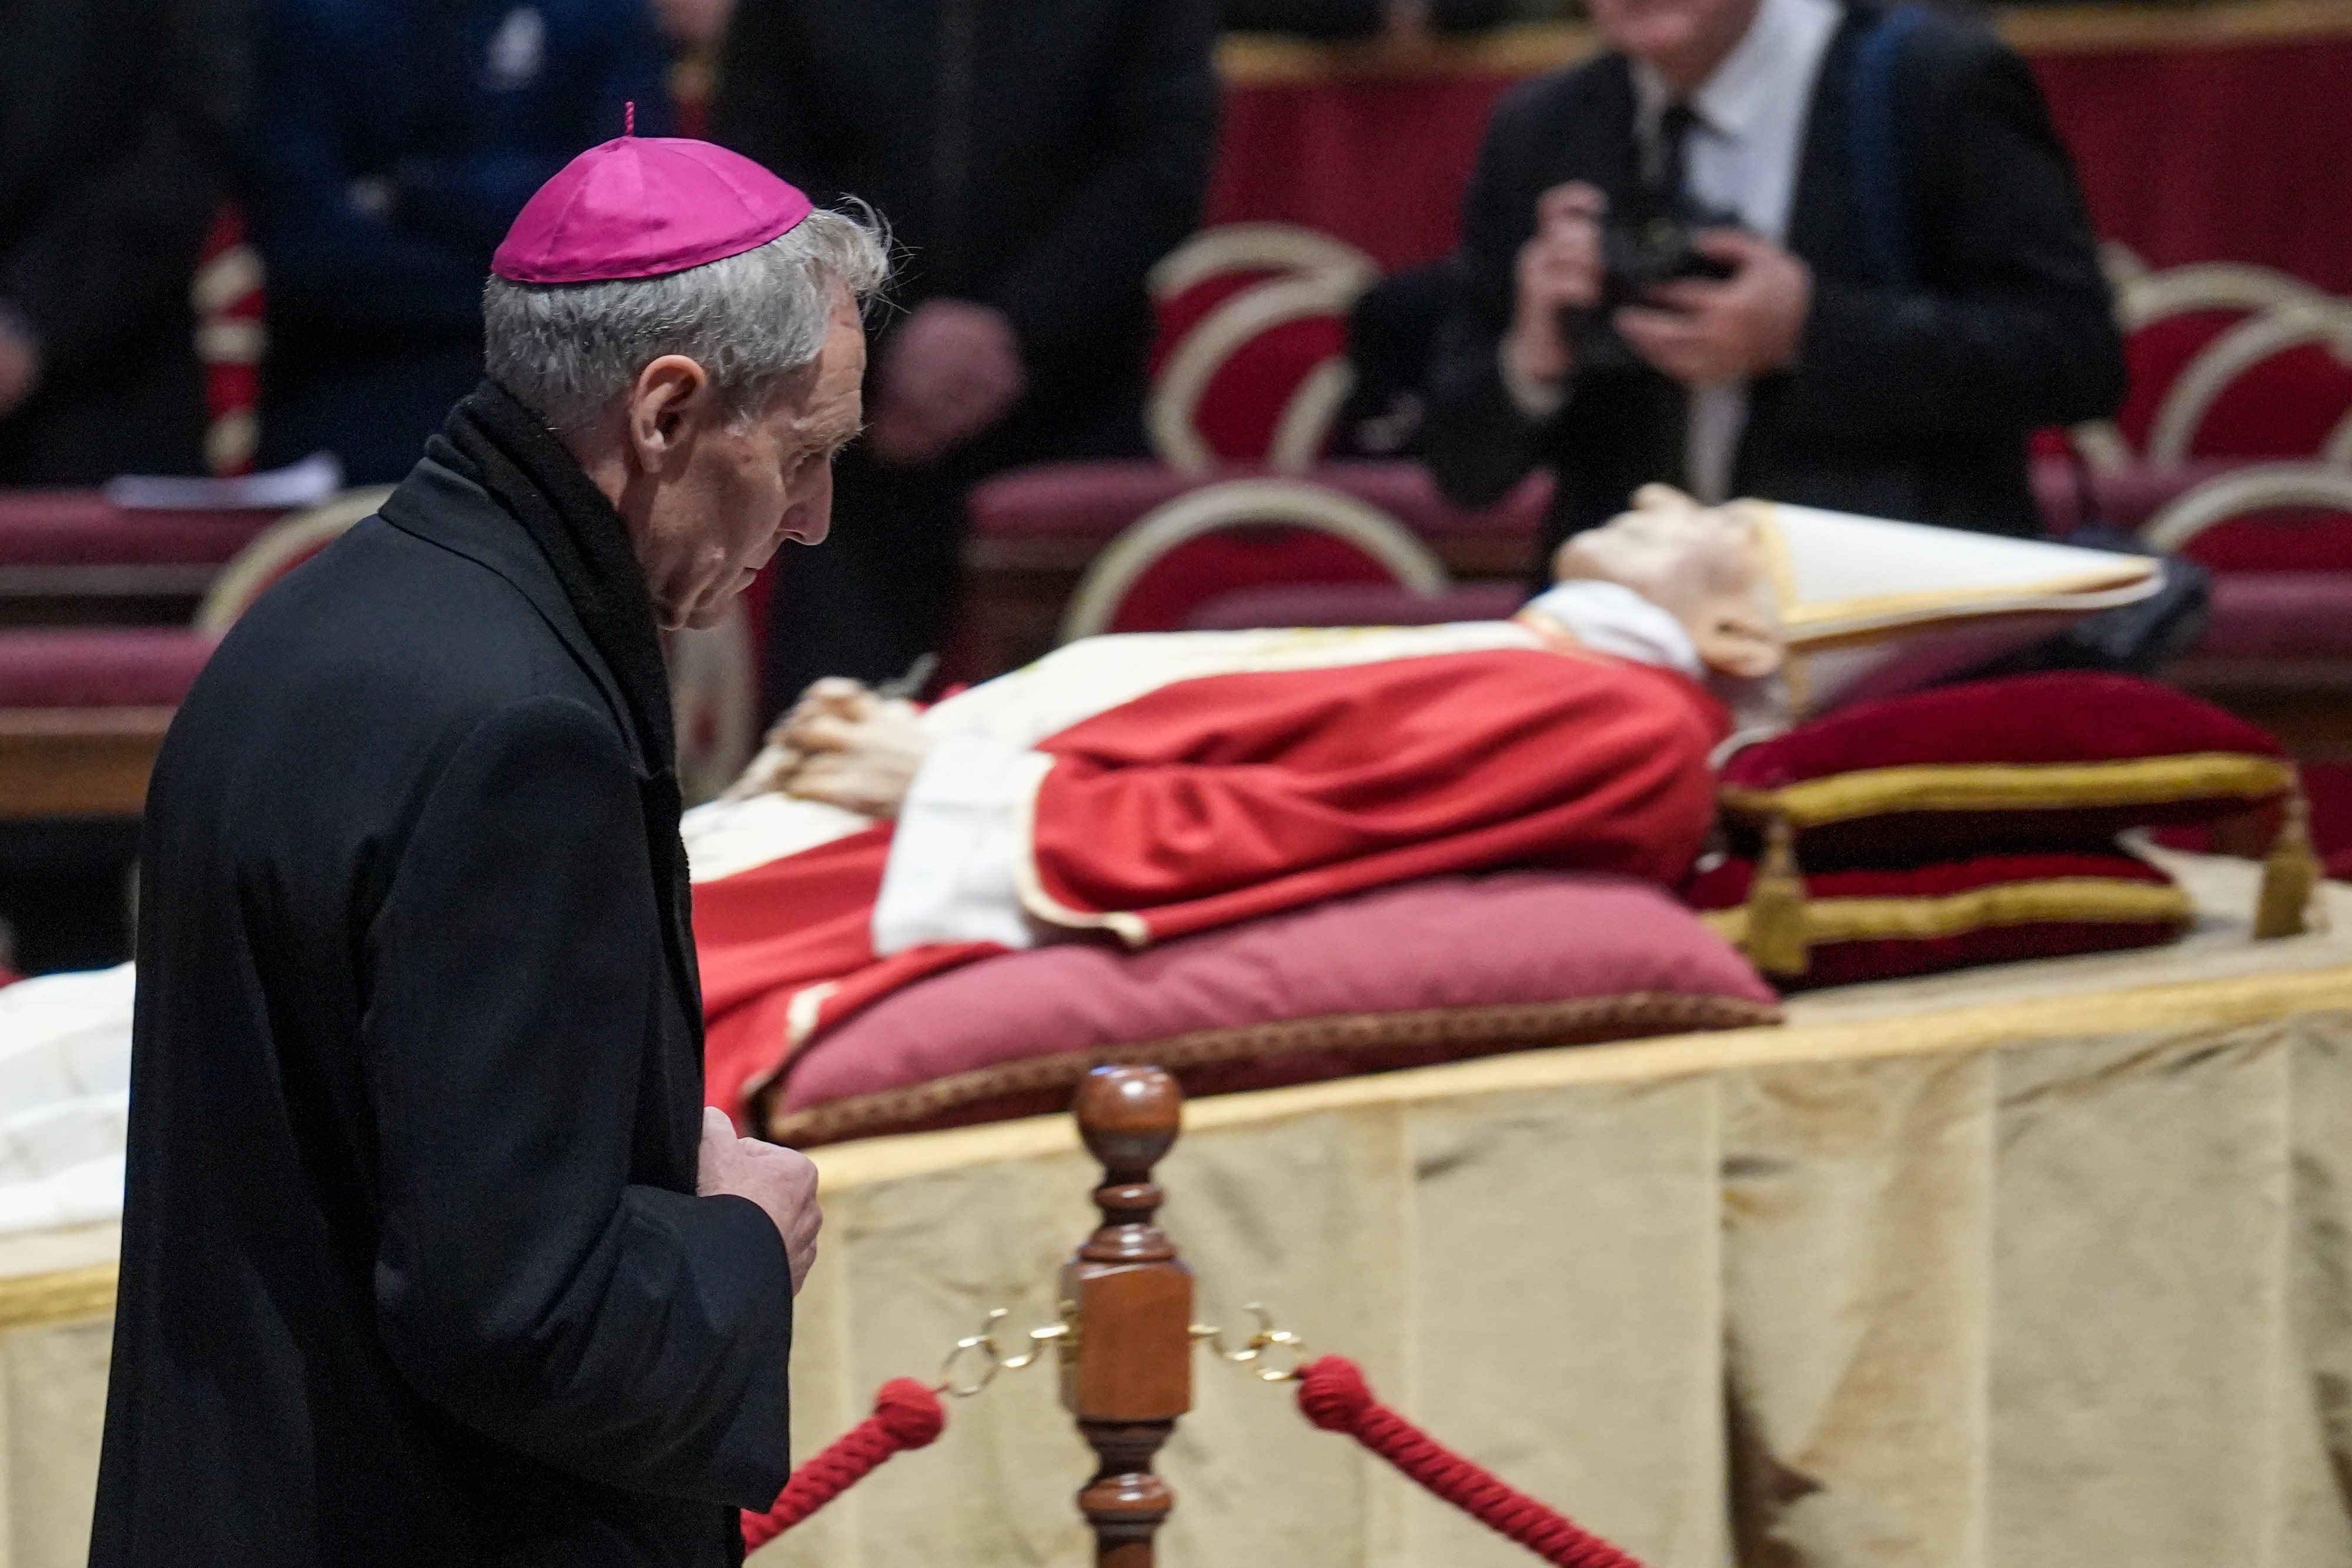 Archbishop Georg Gänswein prays in front of the body of